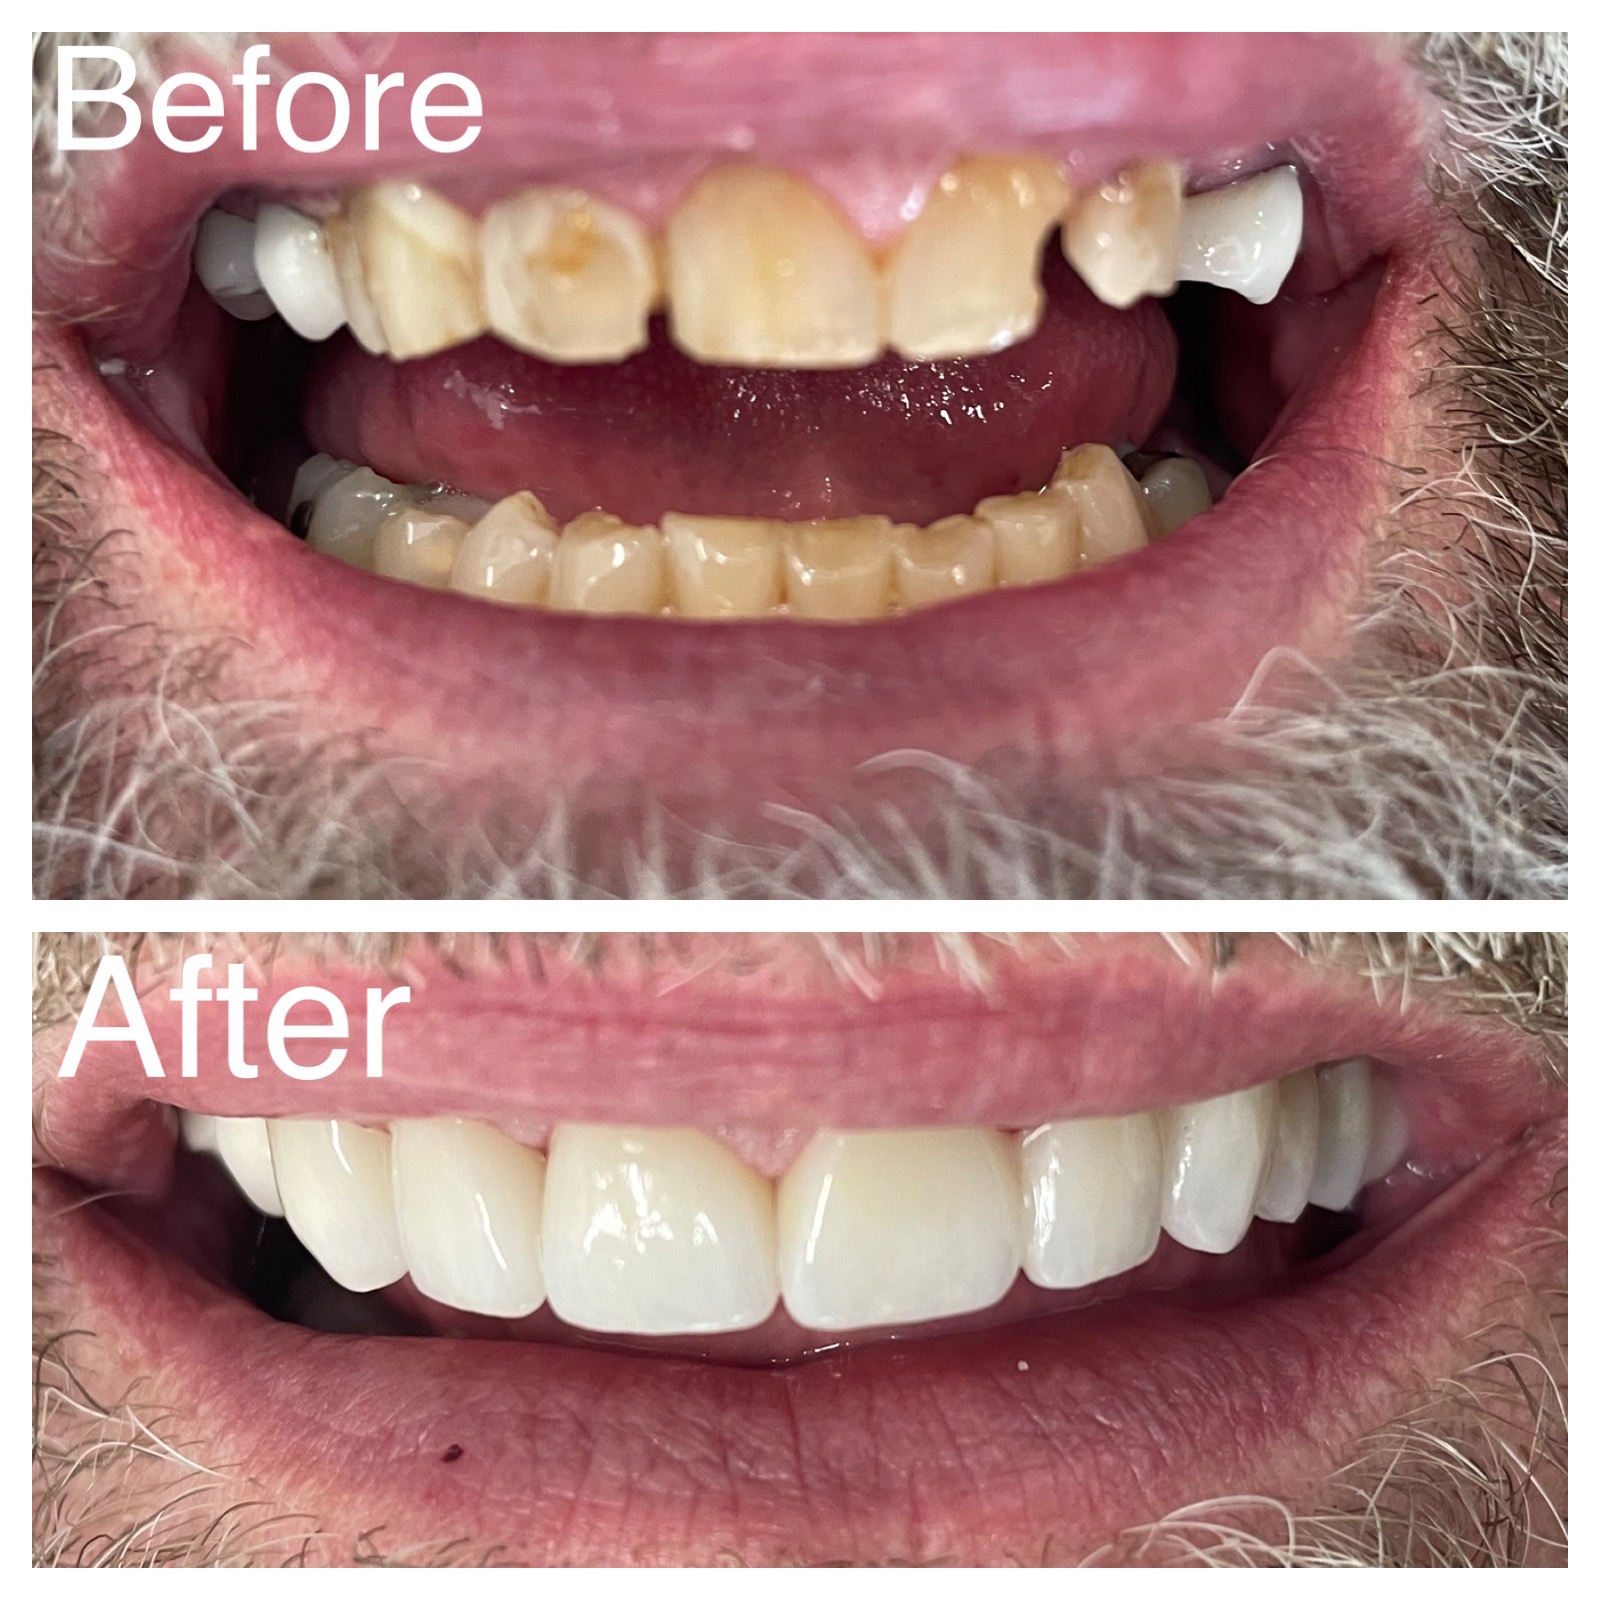 Patient before and after dental procedures